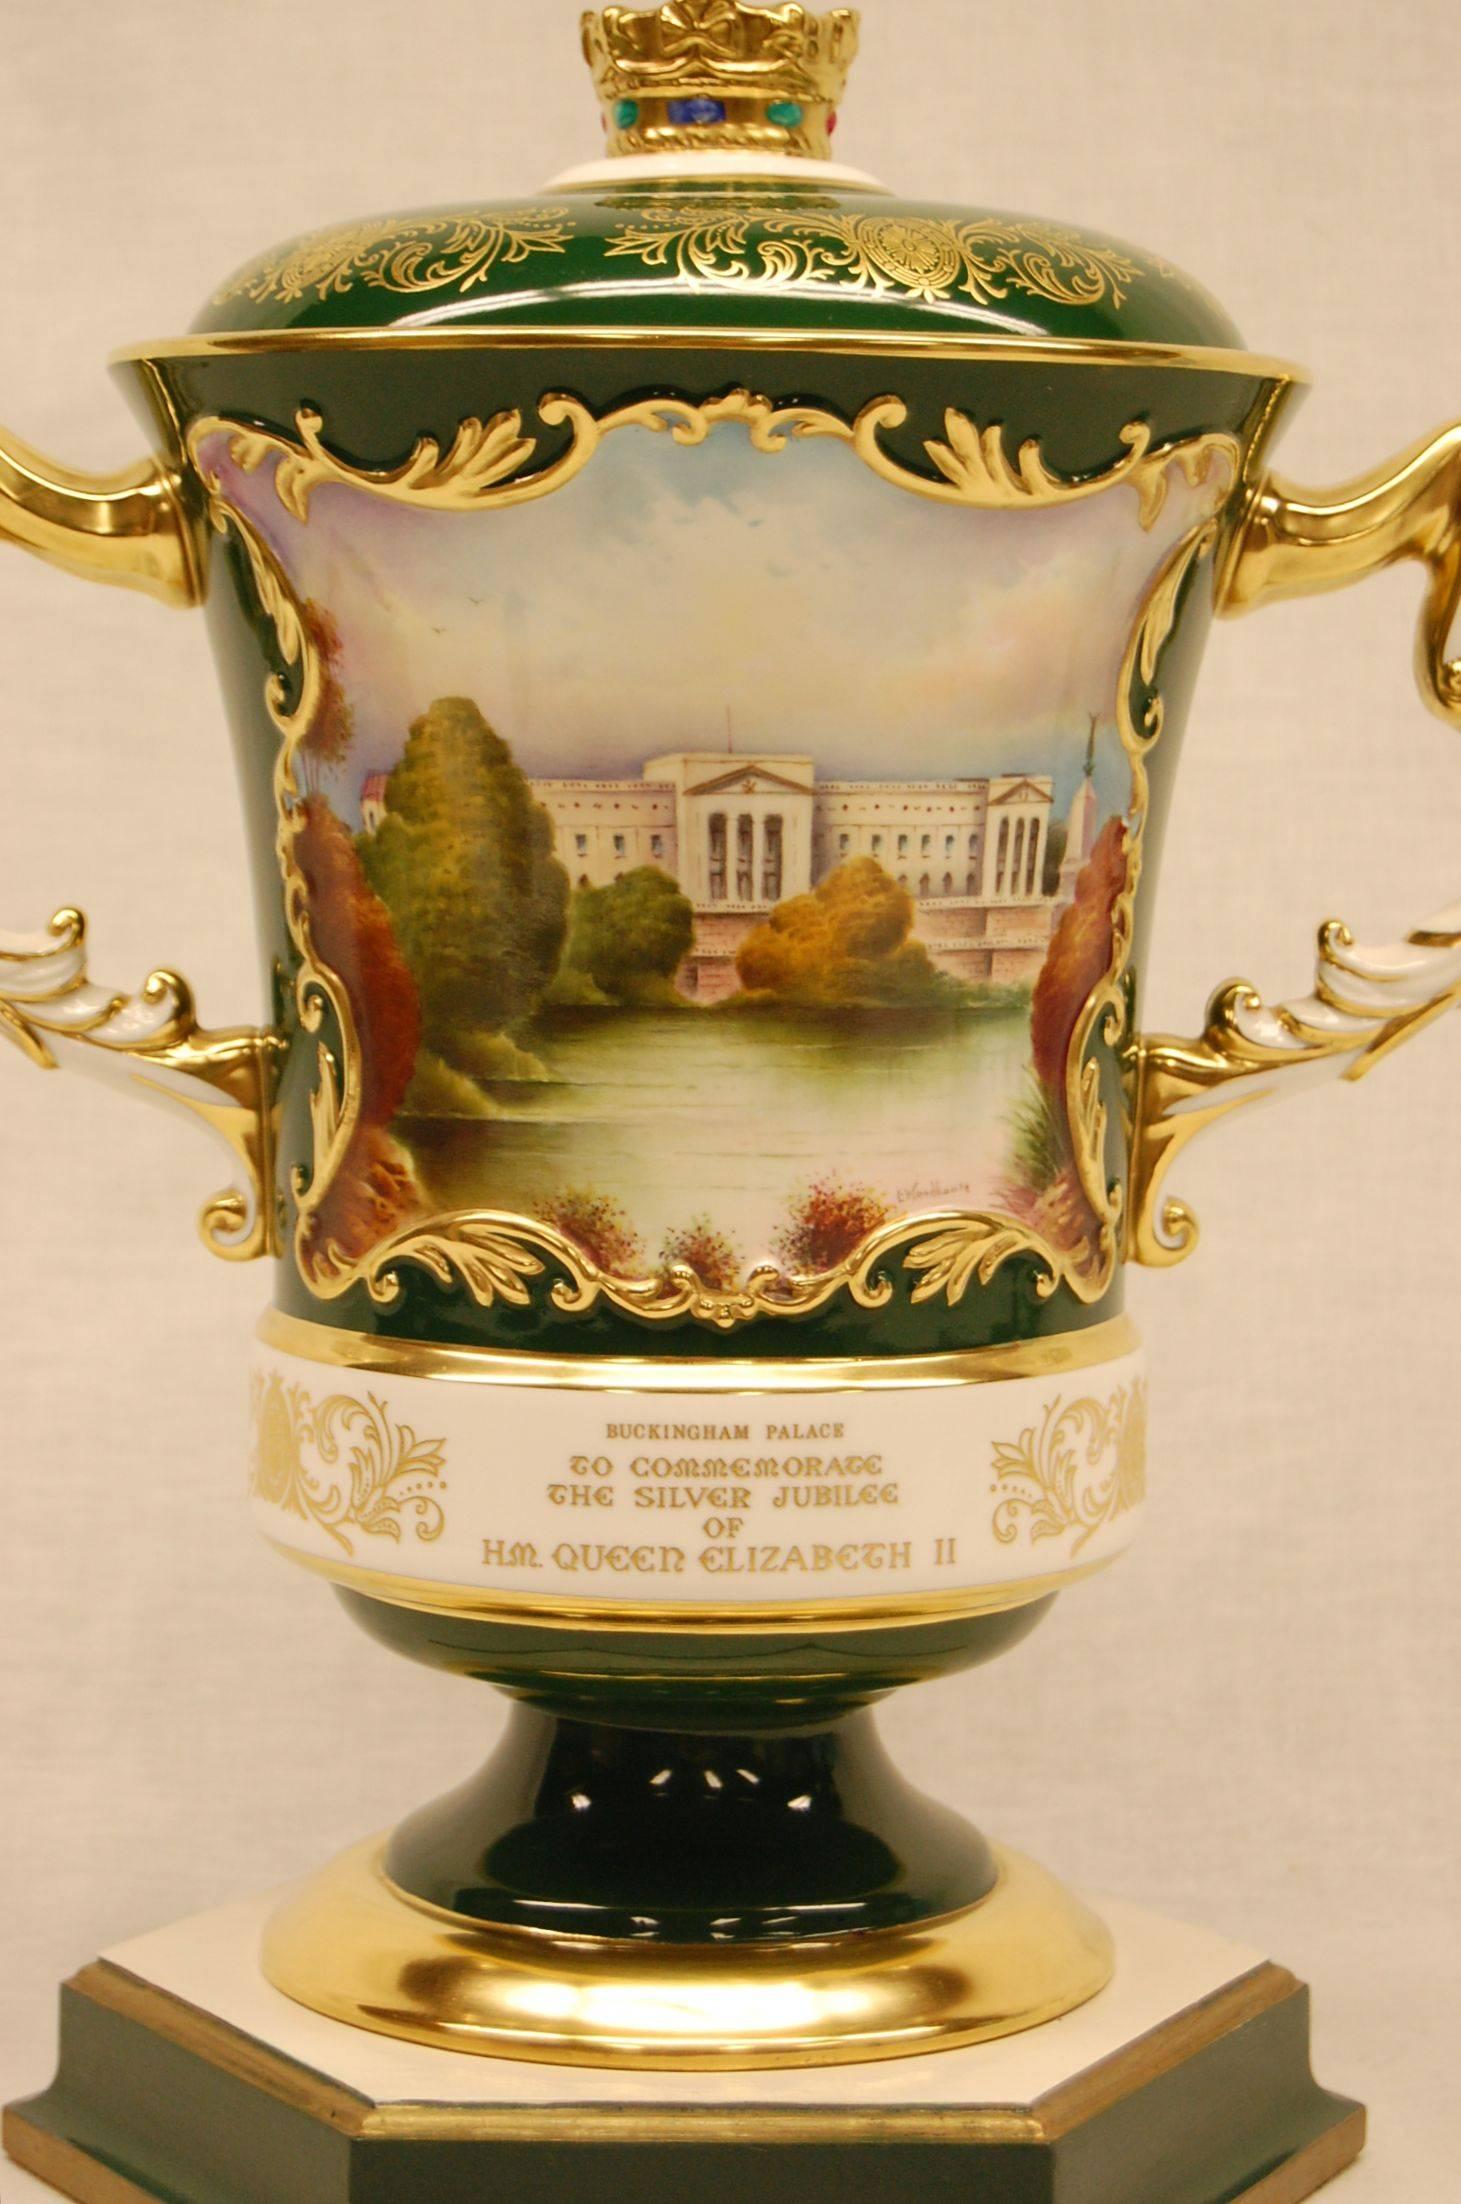 This lidded urn on wooden base is in mint condition, made in 1977 to commemorate the silver jubilee of Queen Elizabeth II. Made by Aynsley in England.